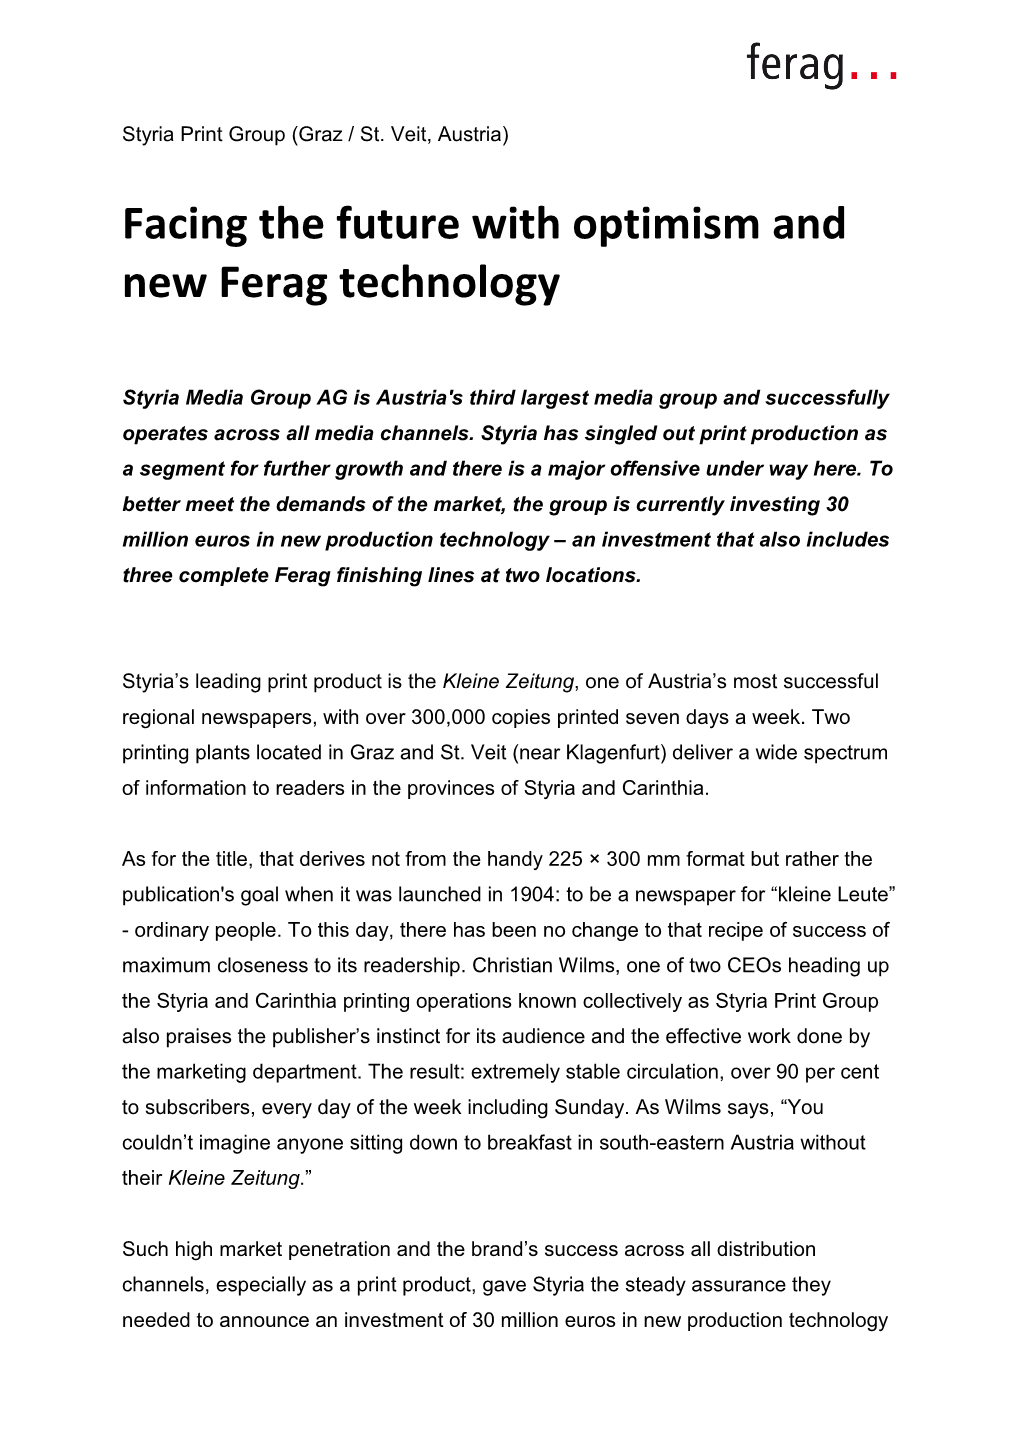 Facing the Future with Optimism and New Ferag Technology